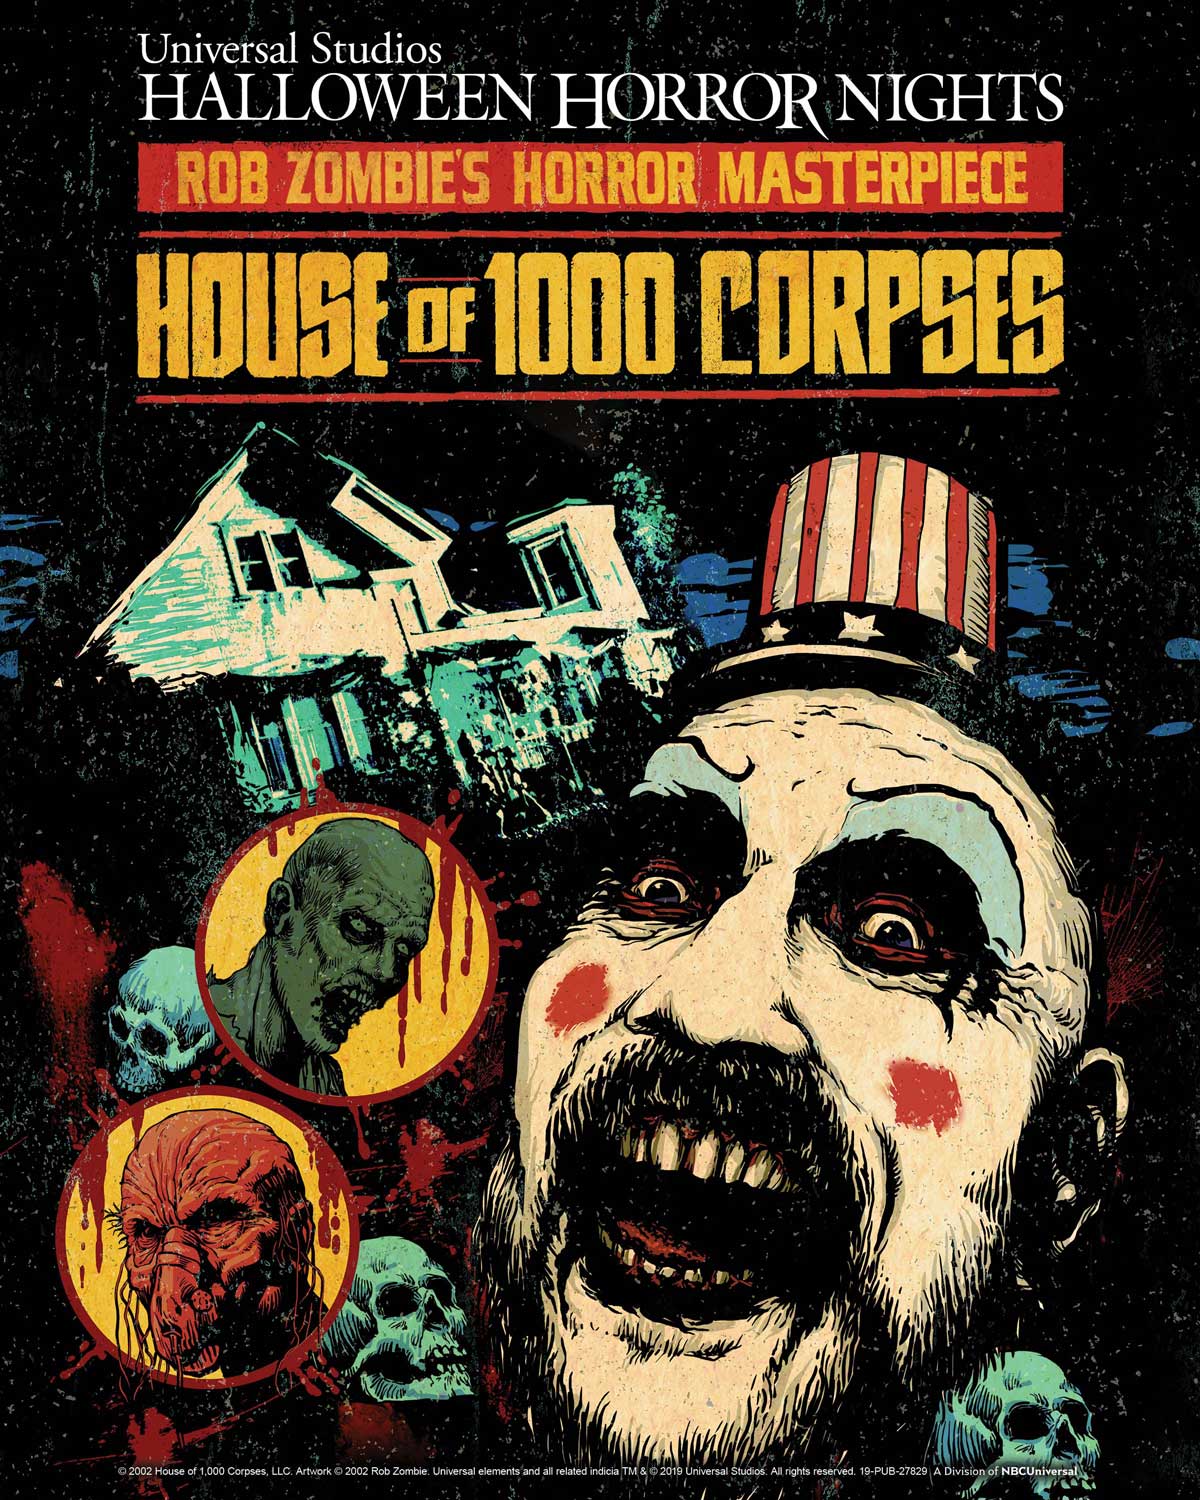 House-of-1000-Corpses-is-Coming-to-Universal-Studios-Halloween-Horror-Nights-2019 ©2018 Universal Orlando. All Rights Reserved